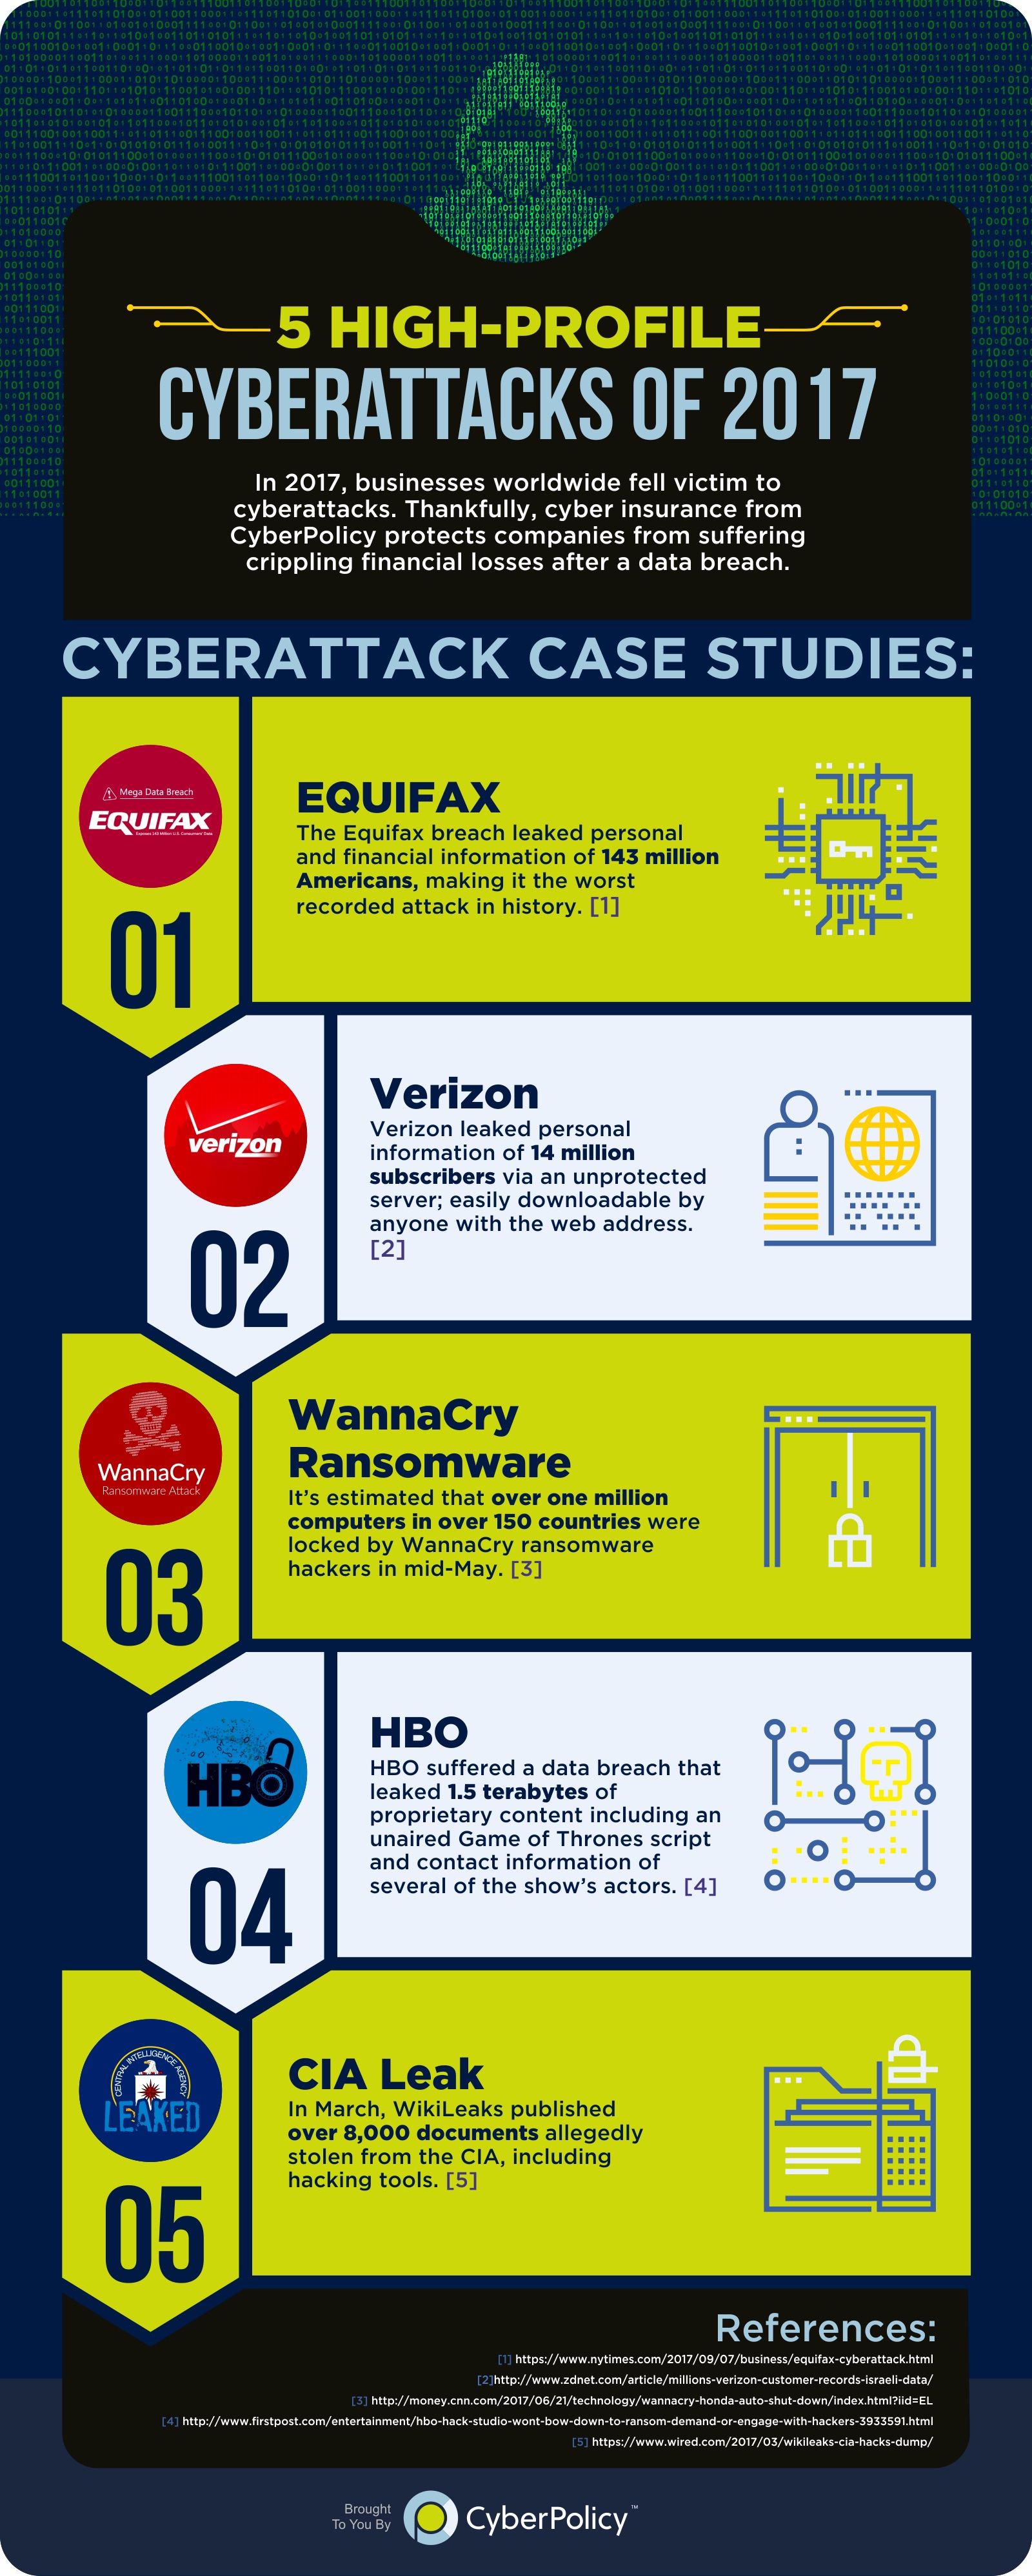 cyberpolicy_-_5_high-profile_cyberattacks_of_2017_-_infographic_b